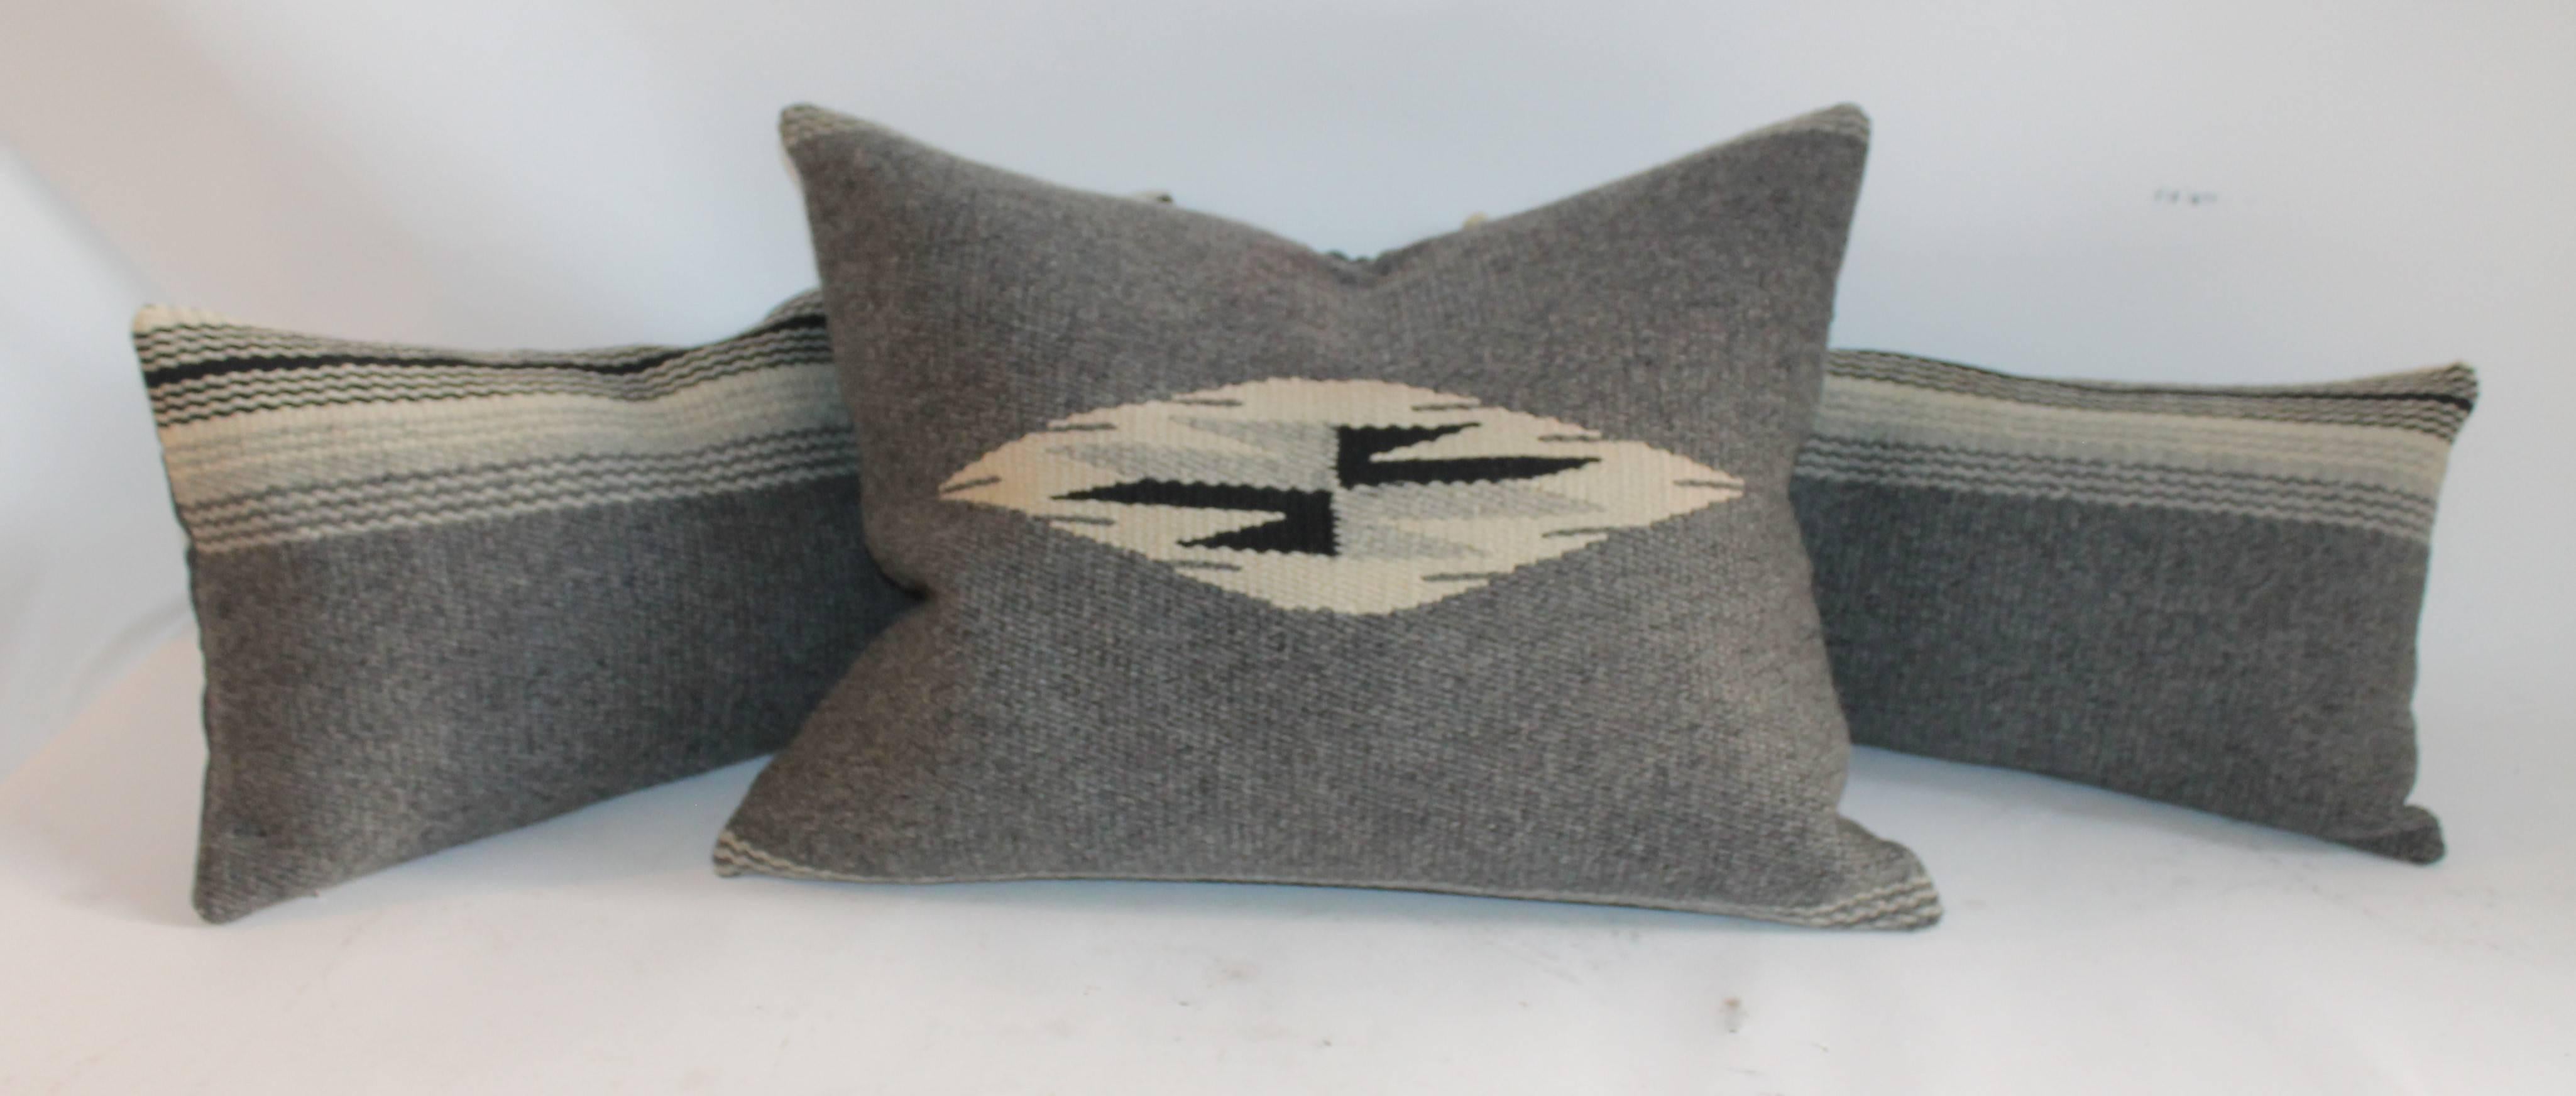 Great pattern Chimayo pillows in excellent condition. Two bolster pillows with stripes and one larger pillow. Sold as a group of three.

Measures: Bolster pillow measures: 22" x 11"
square pillow measures: 23" x 18".